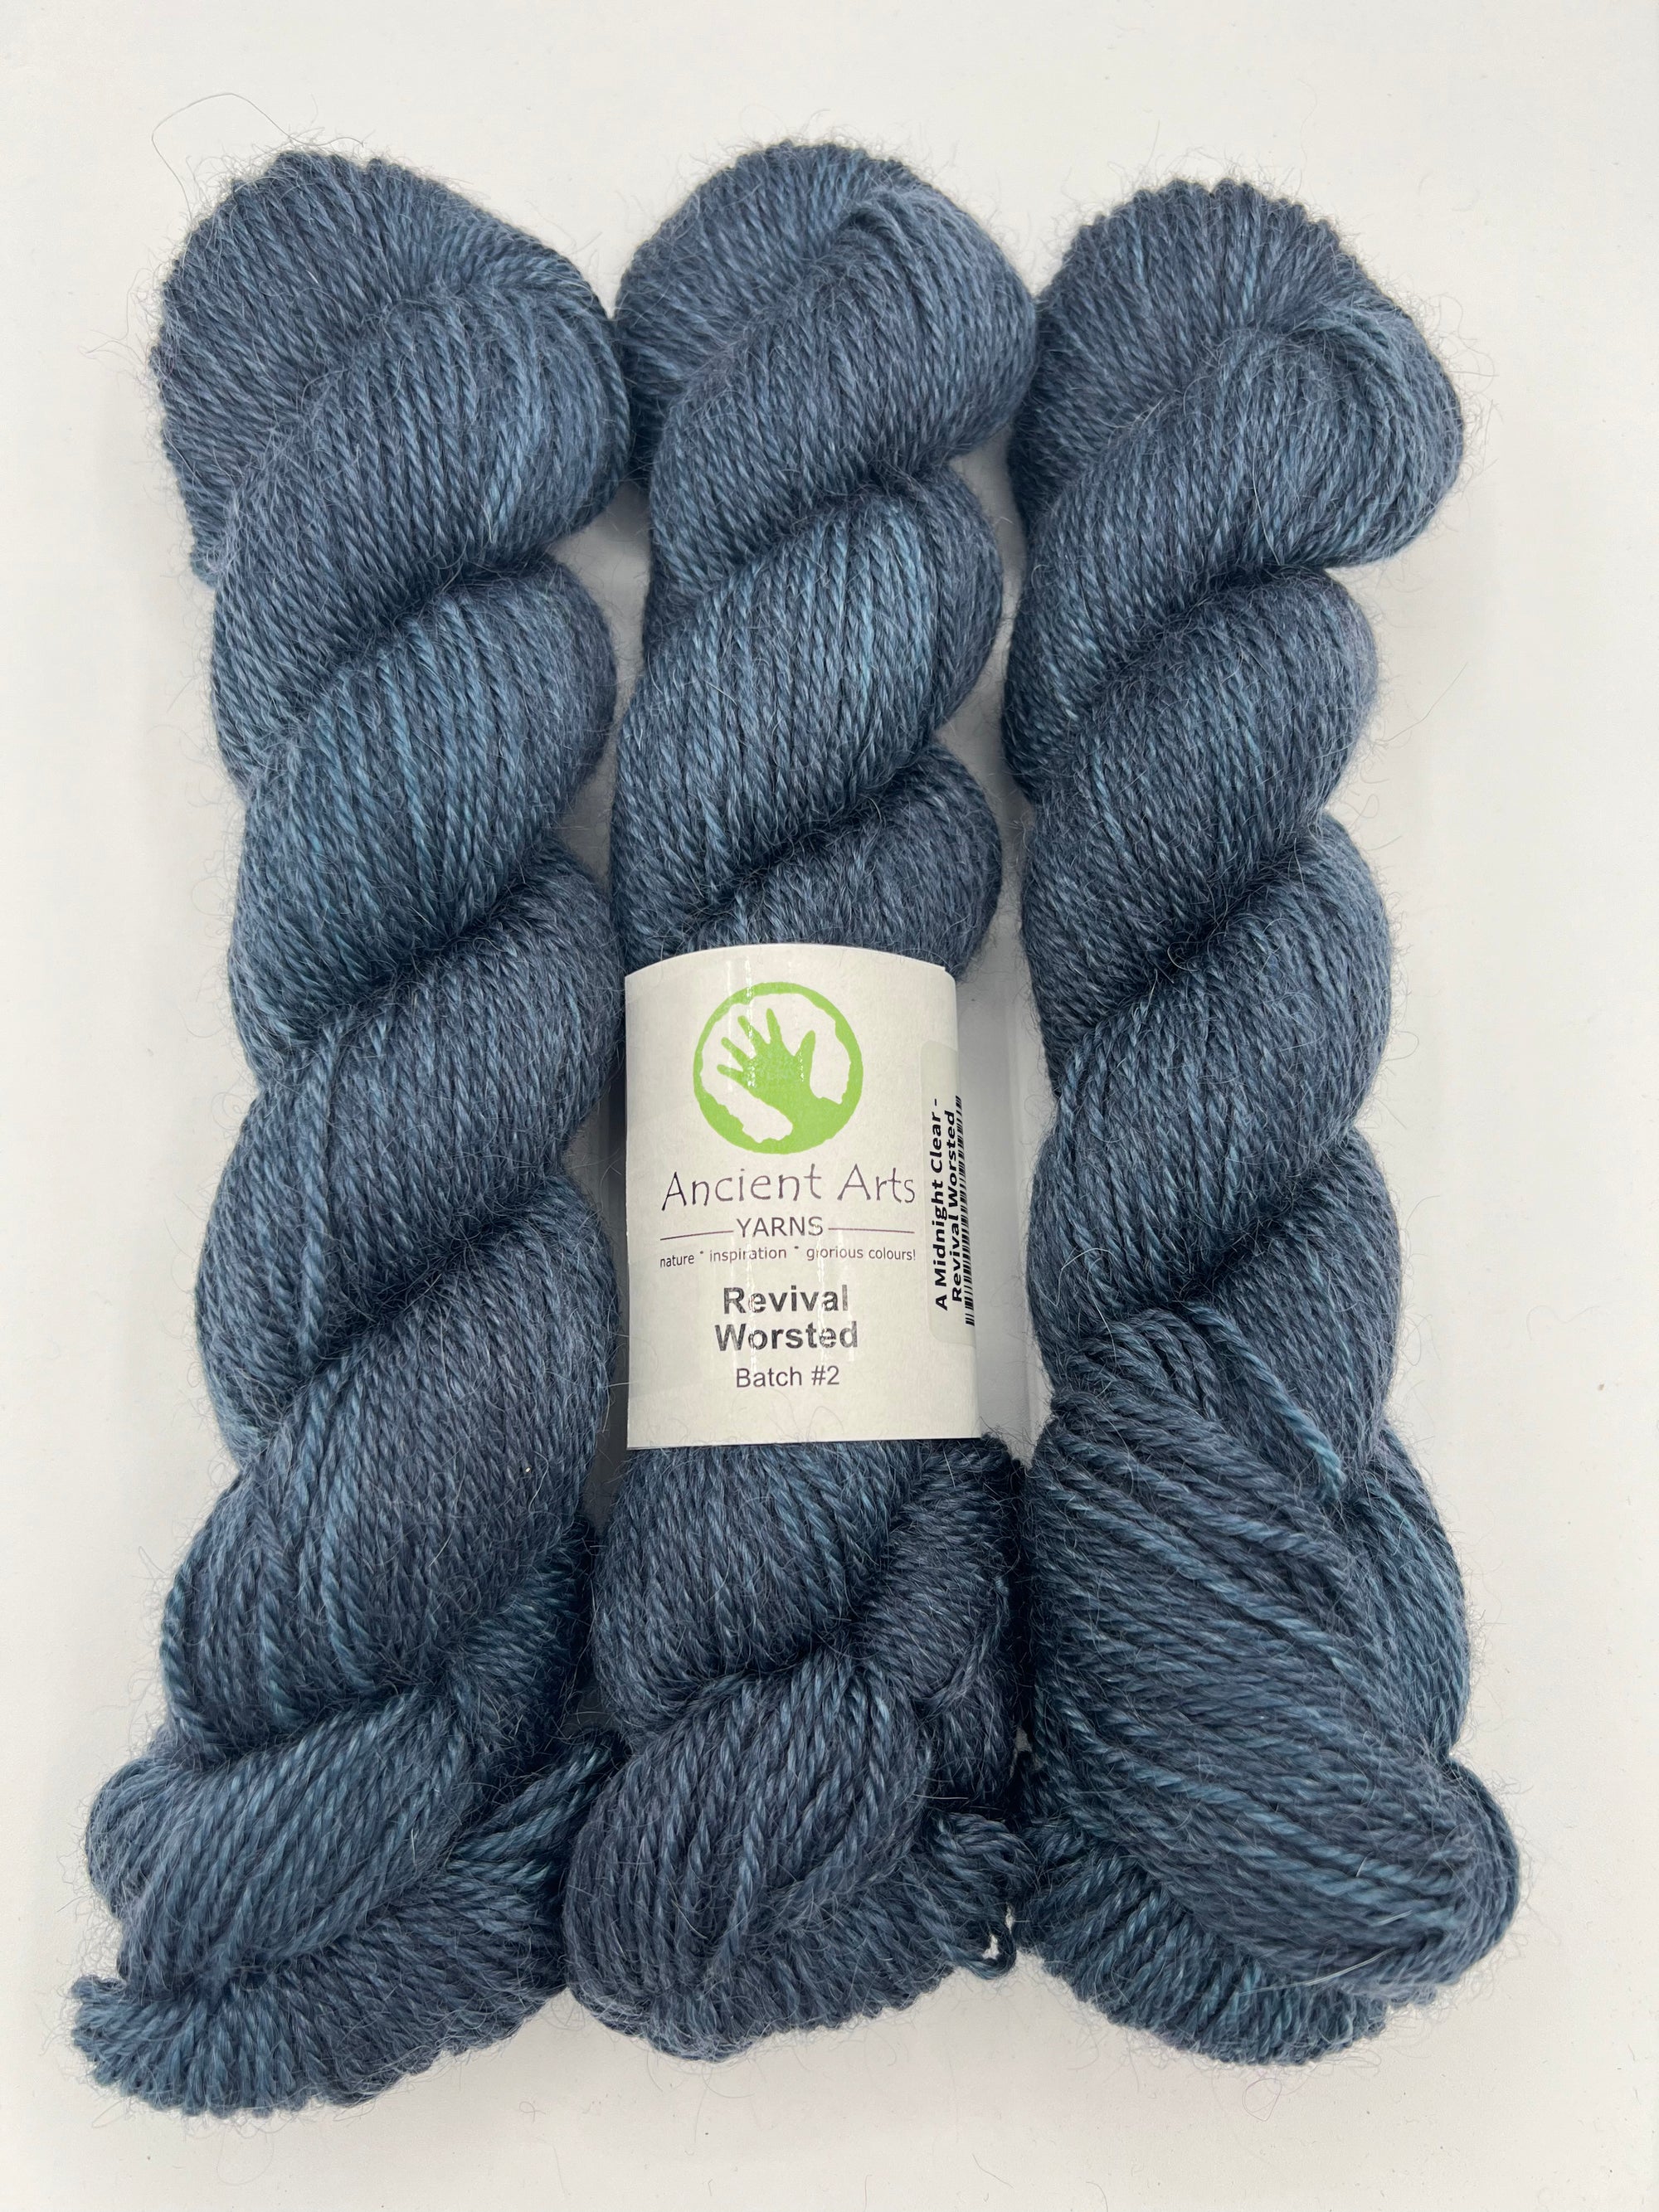 A Midnight Clear - Revival Worsted